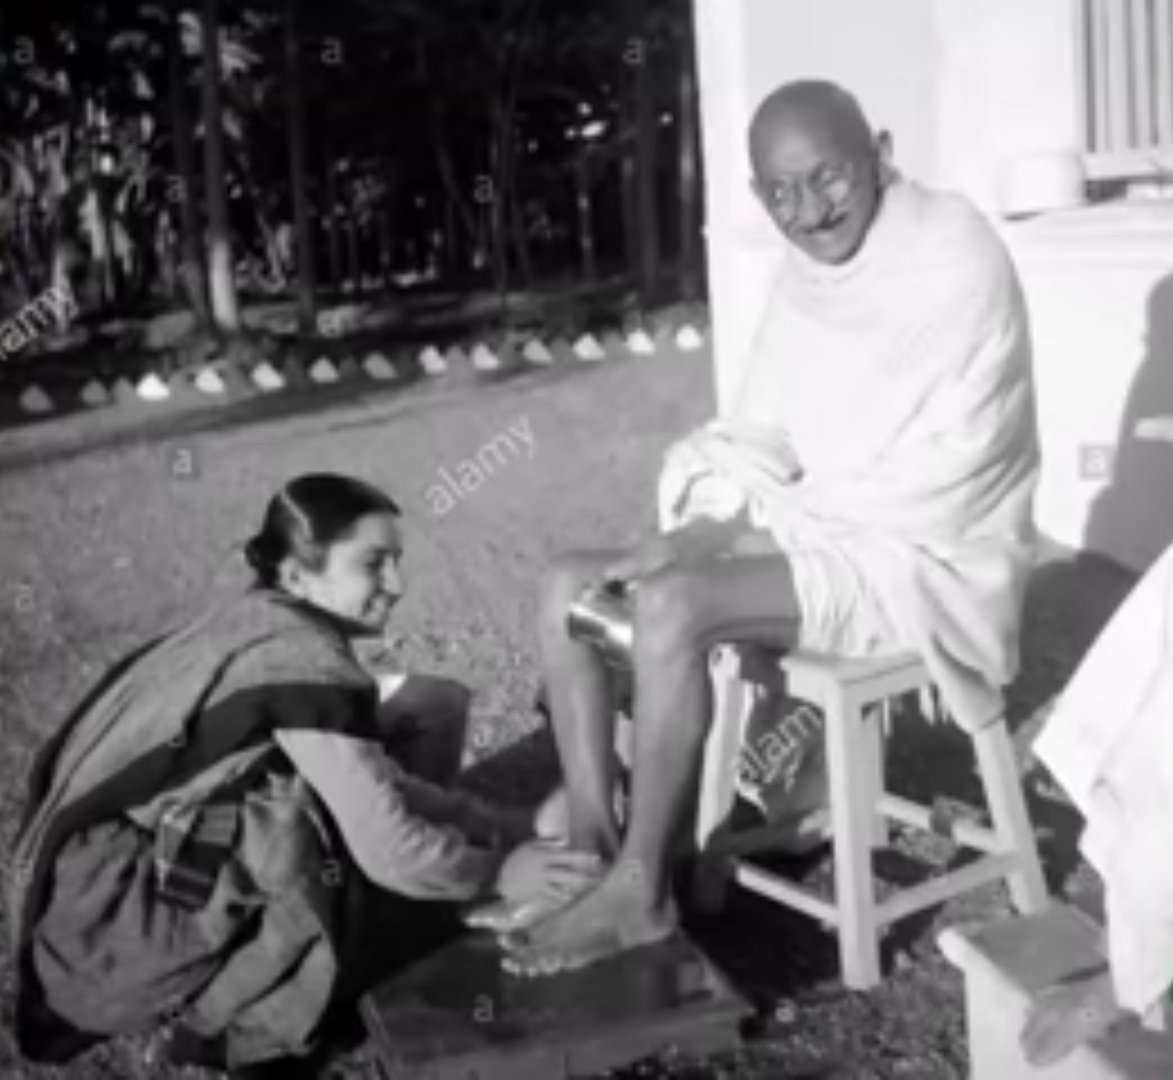 Gandhi was the ambassador of truth, as if "Satyamev Jayate" was not written in Mundakopanishad, but it was written by Gandhi himself in childhood in his notebook.Gandhi was opposed alcohol consumption, as if before Gandhi, people used to stay drunk all the time in India.